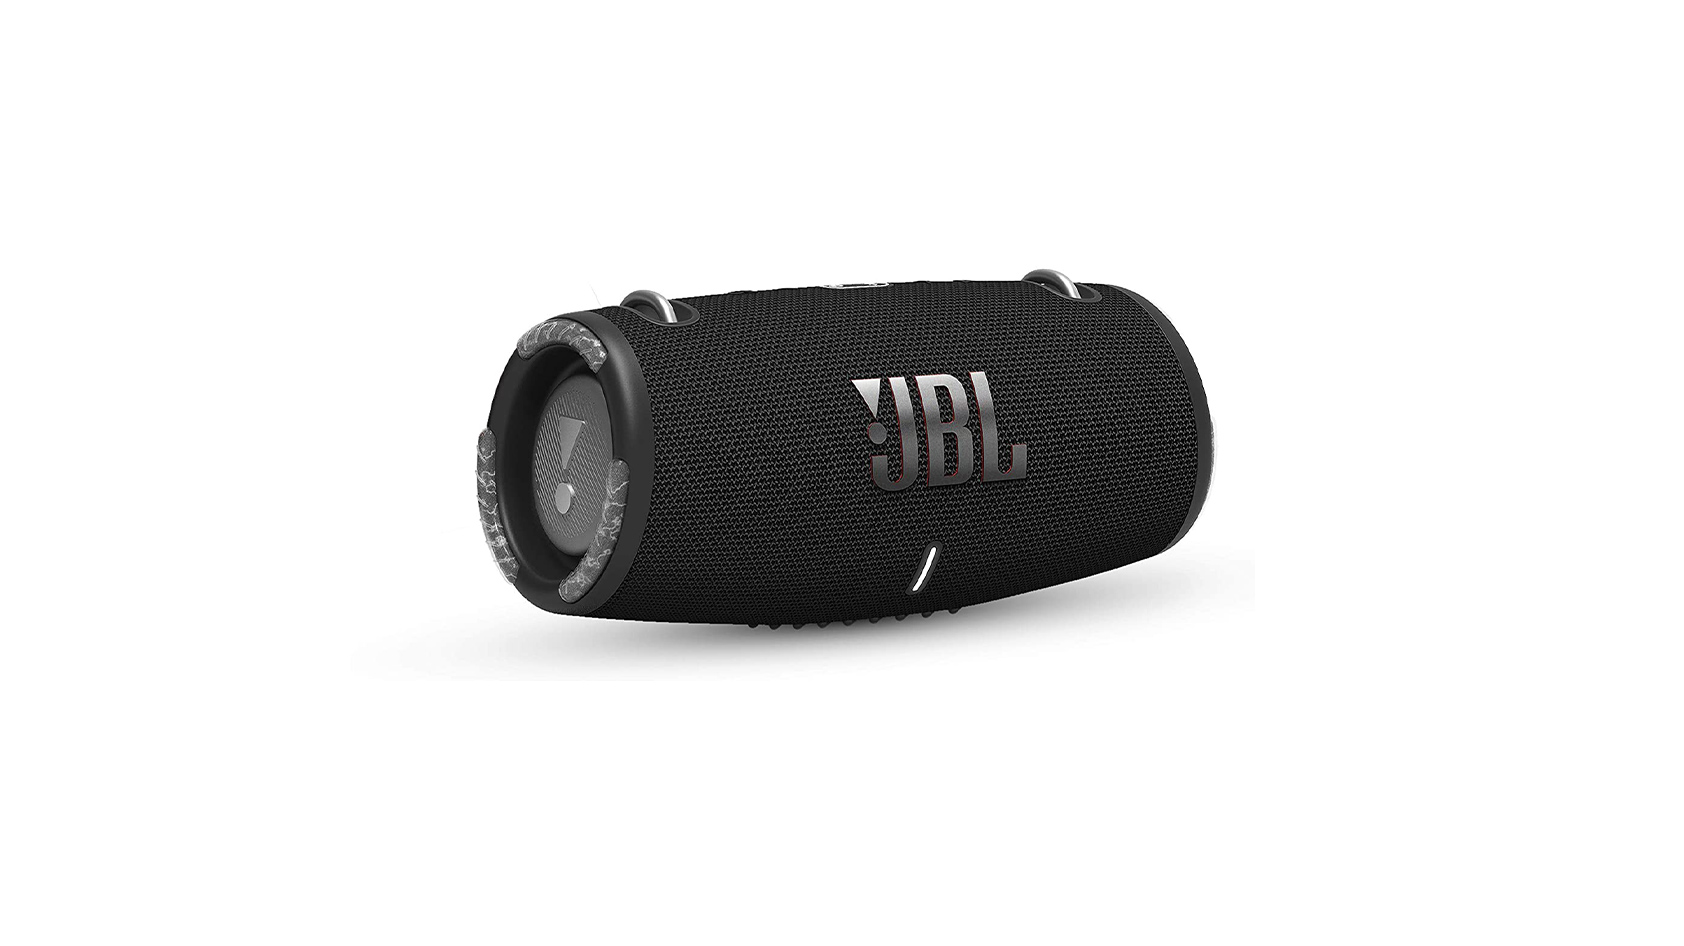 The JBL Xtreme 3 in black against a white background.